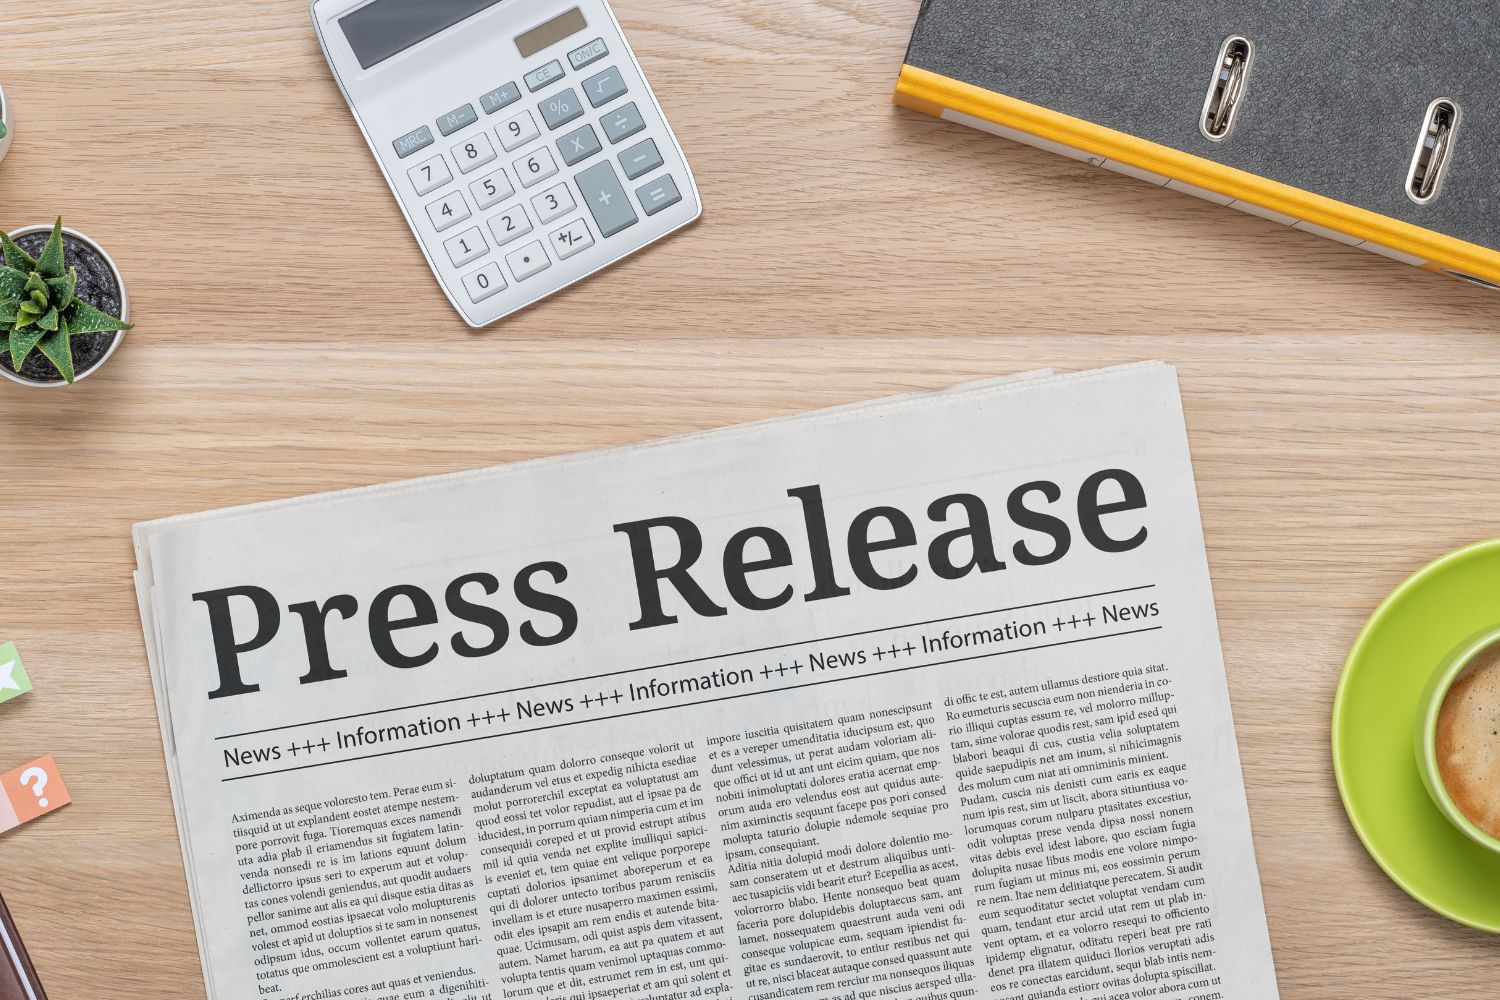 Press Releases from Balanced Bridge Subsidiary Accel